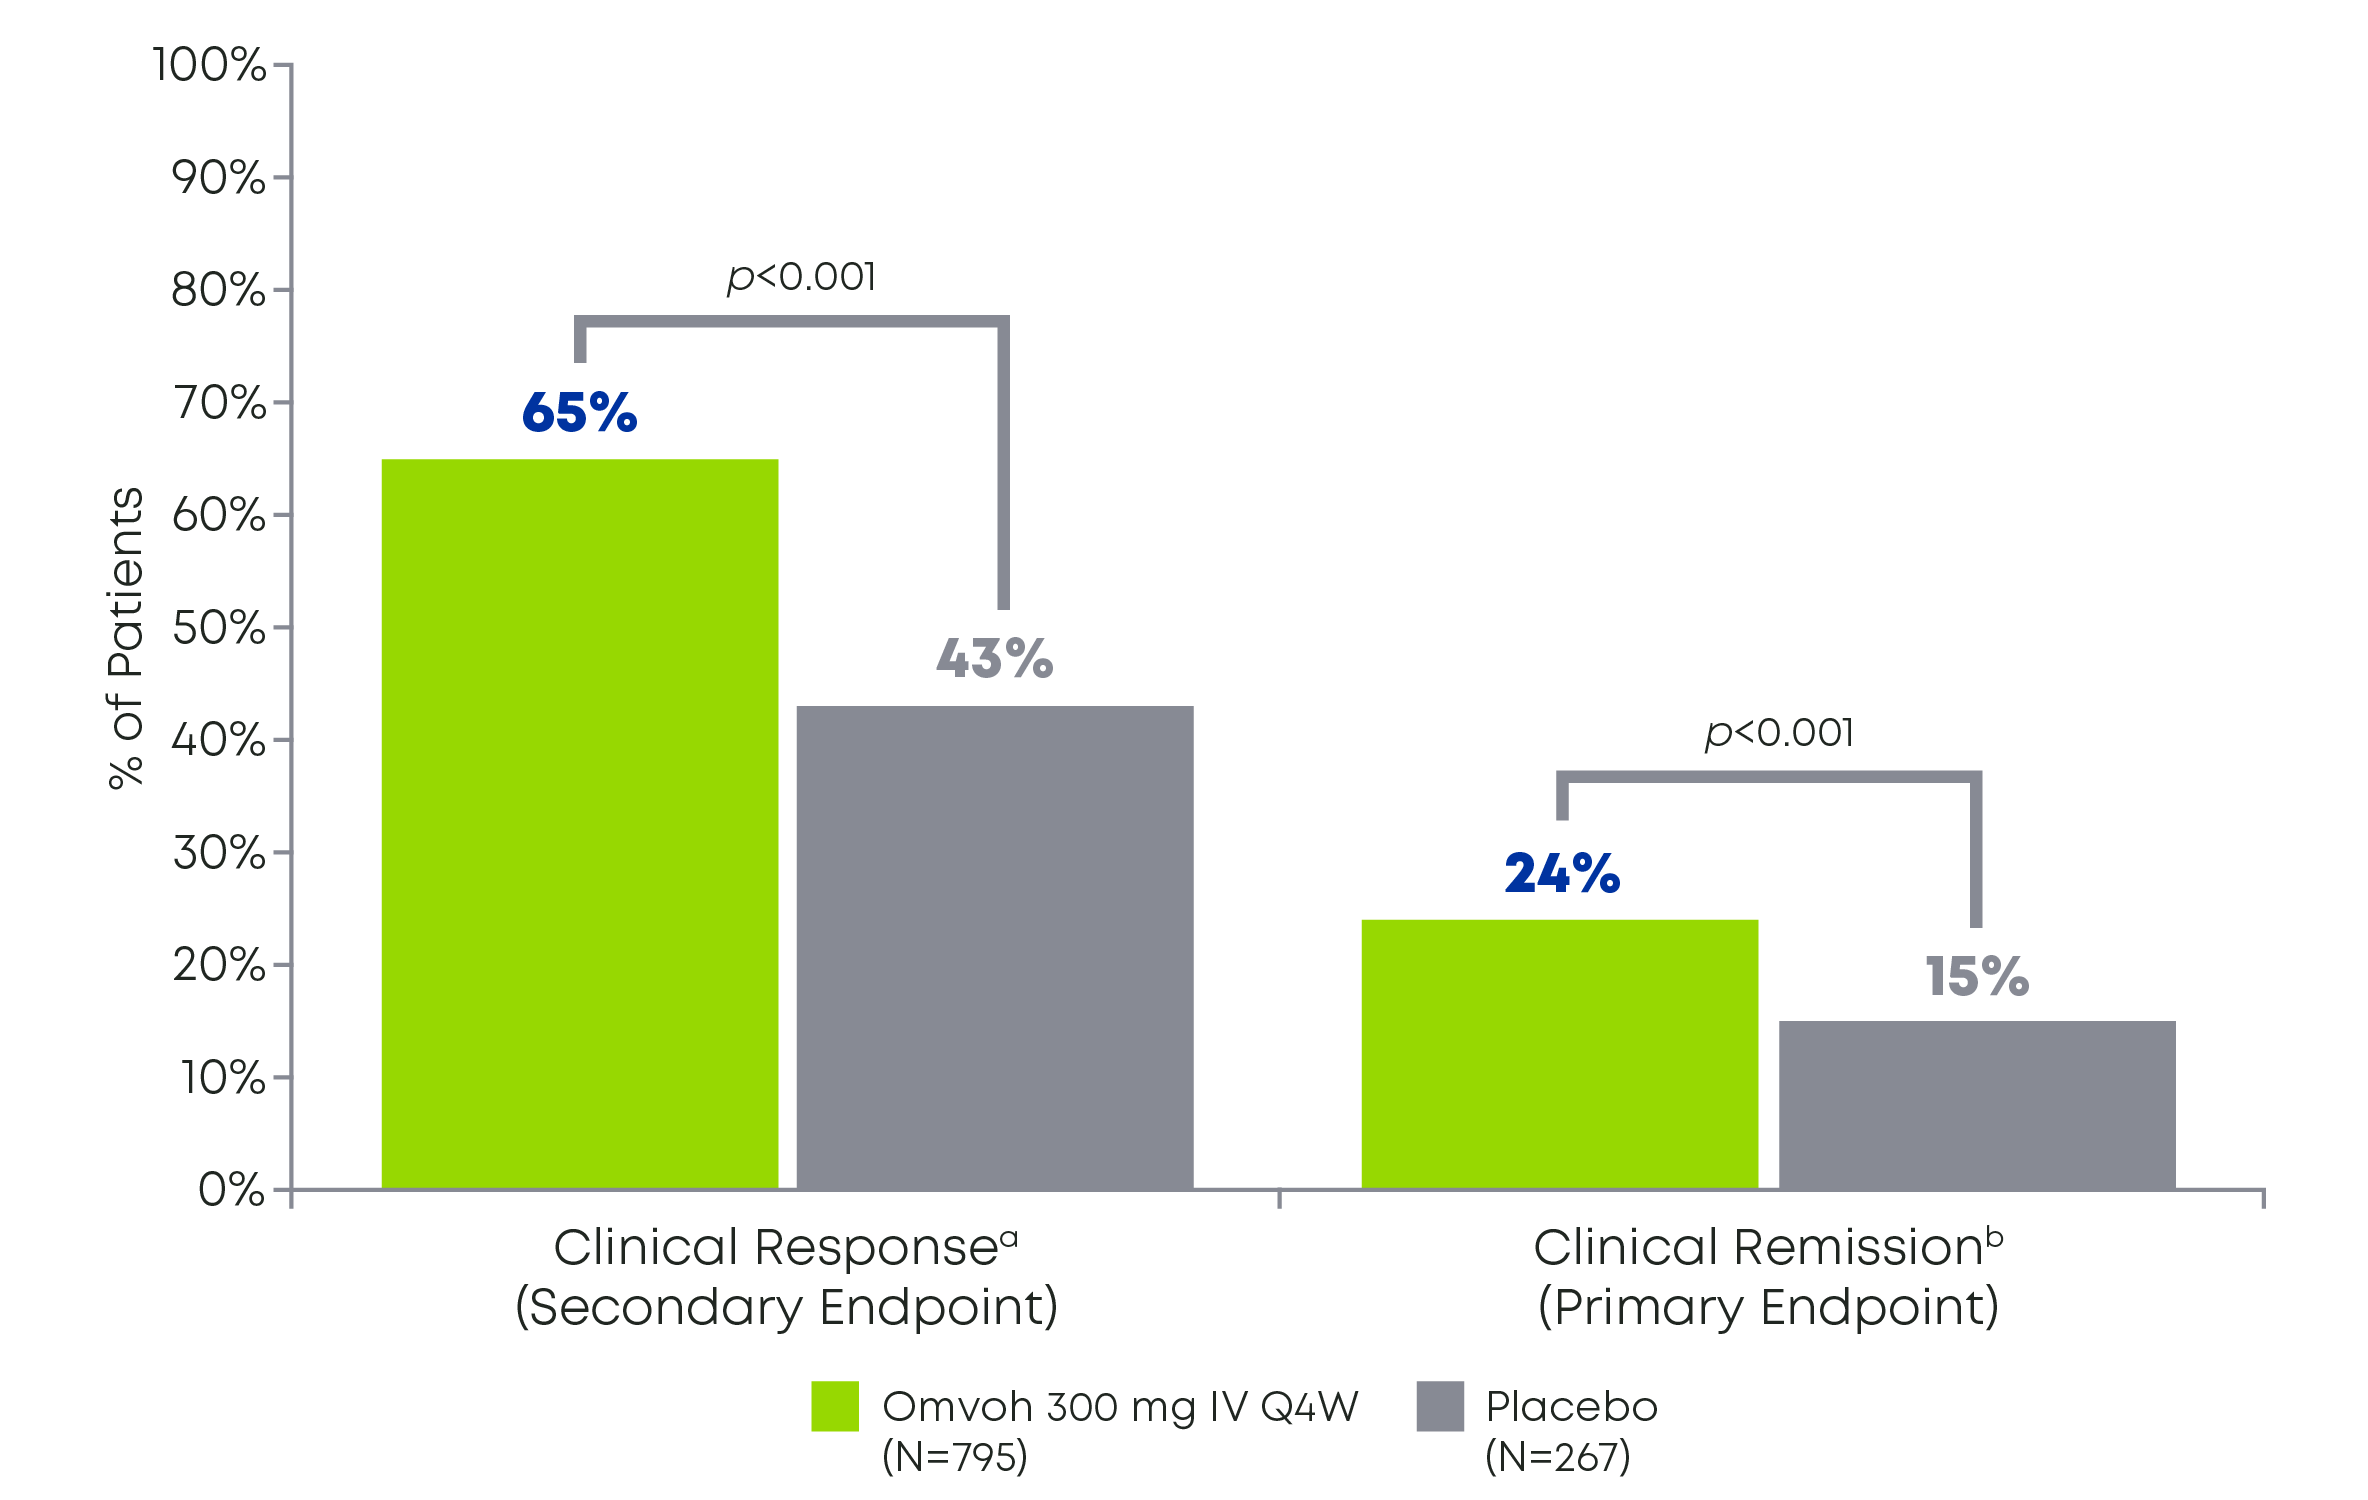 Omvoh remission response at week 12